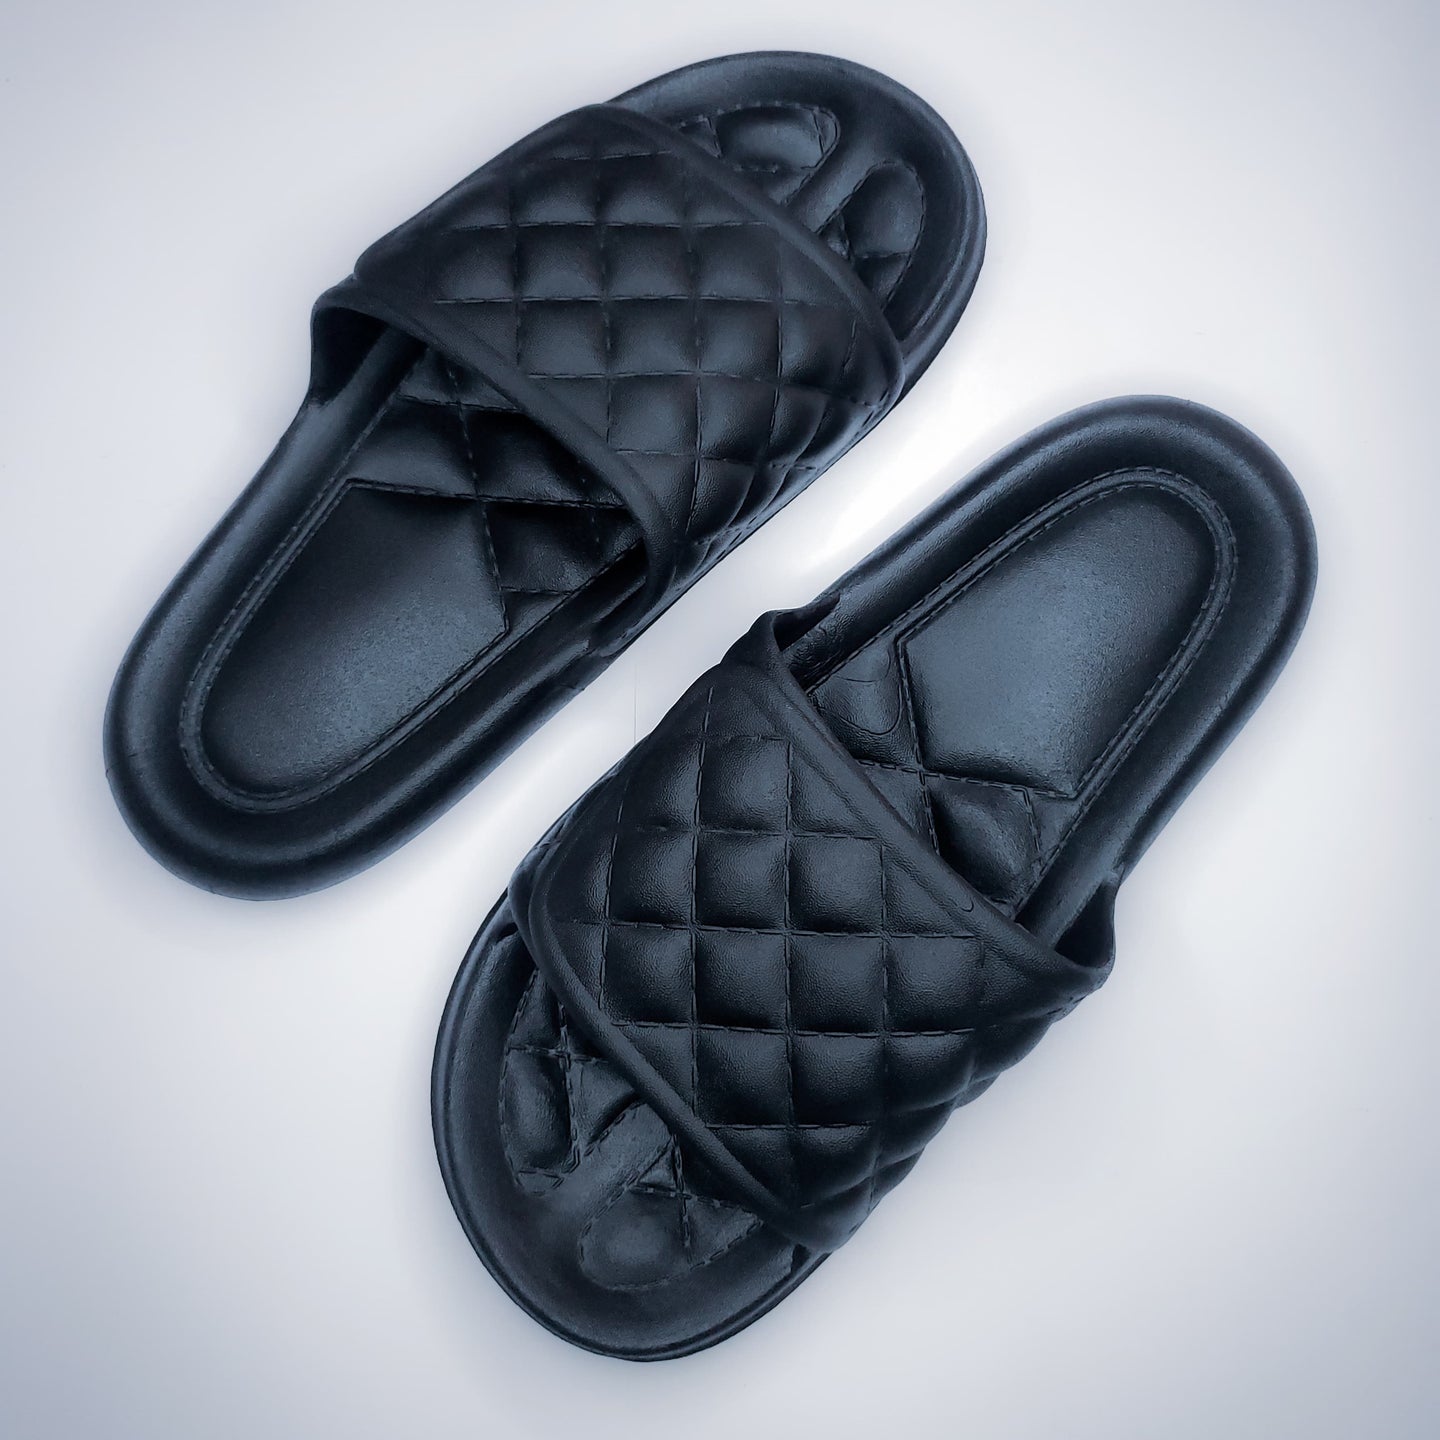 KB-Therapeutic Medicated Slippers